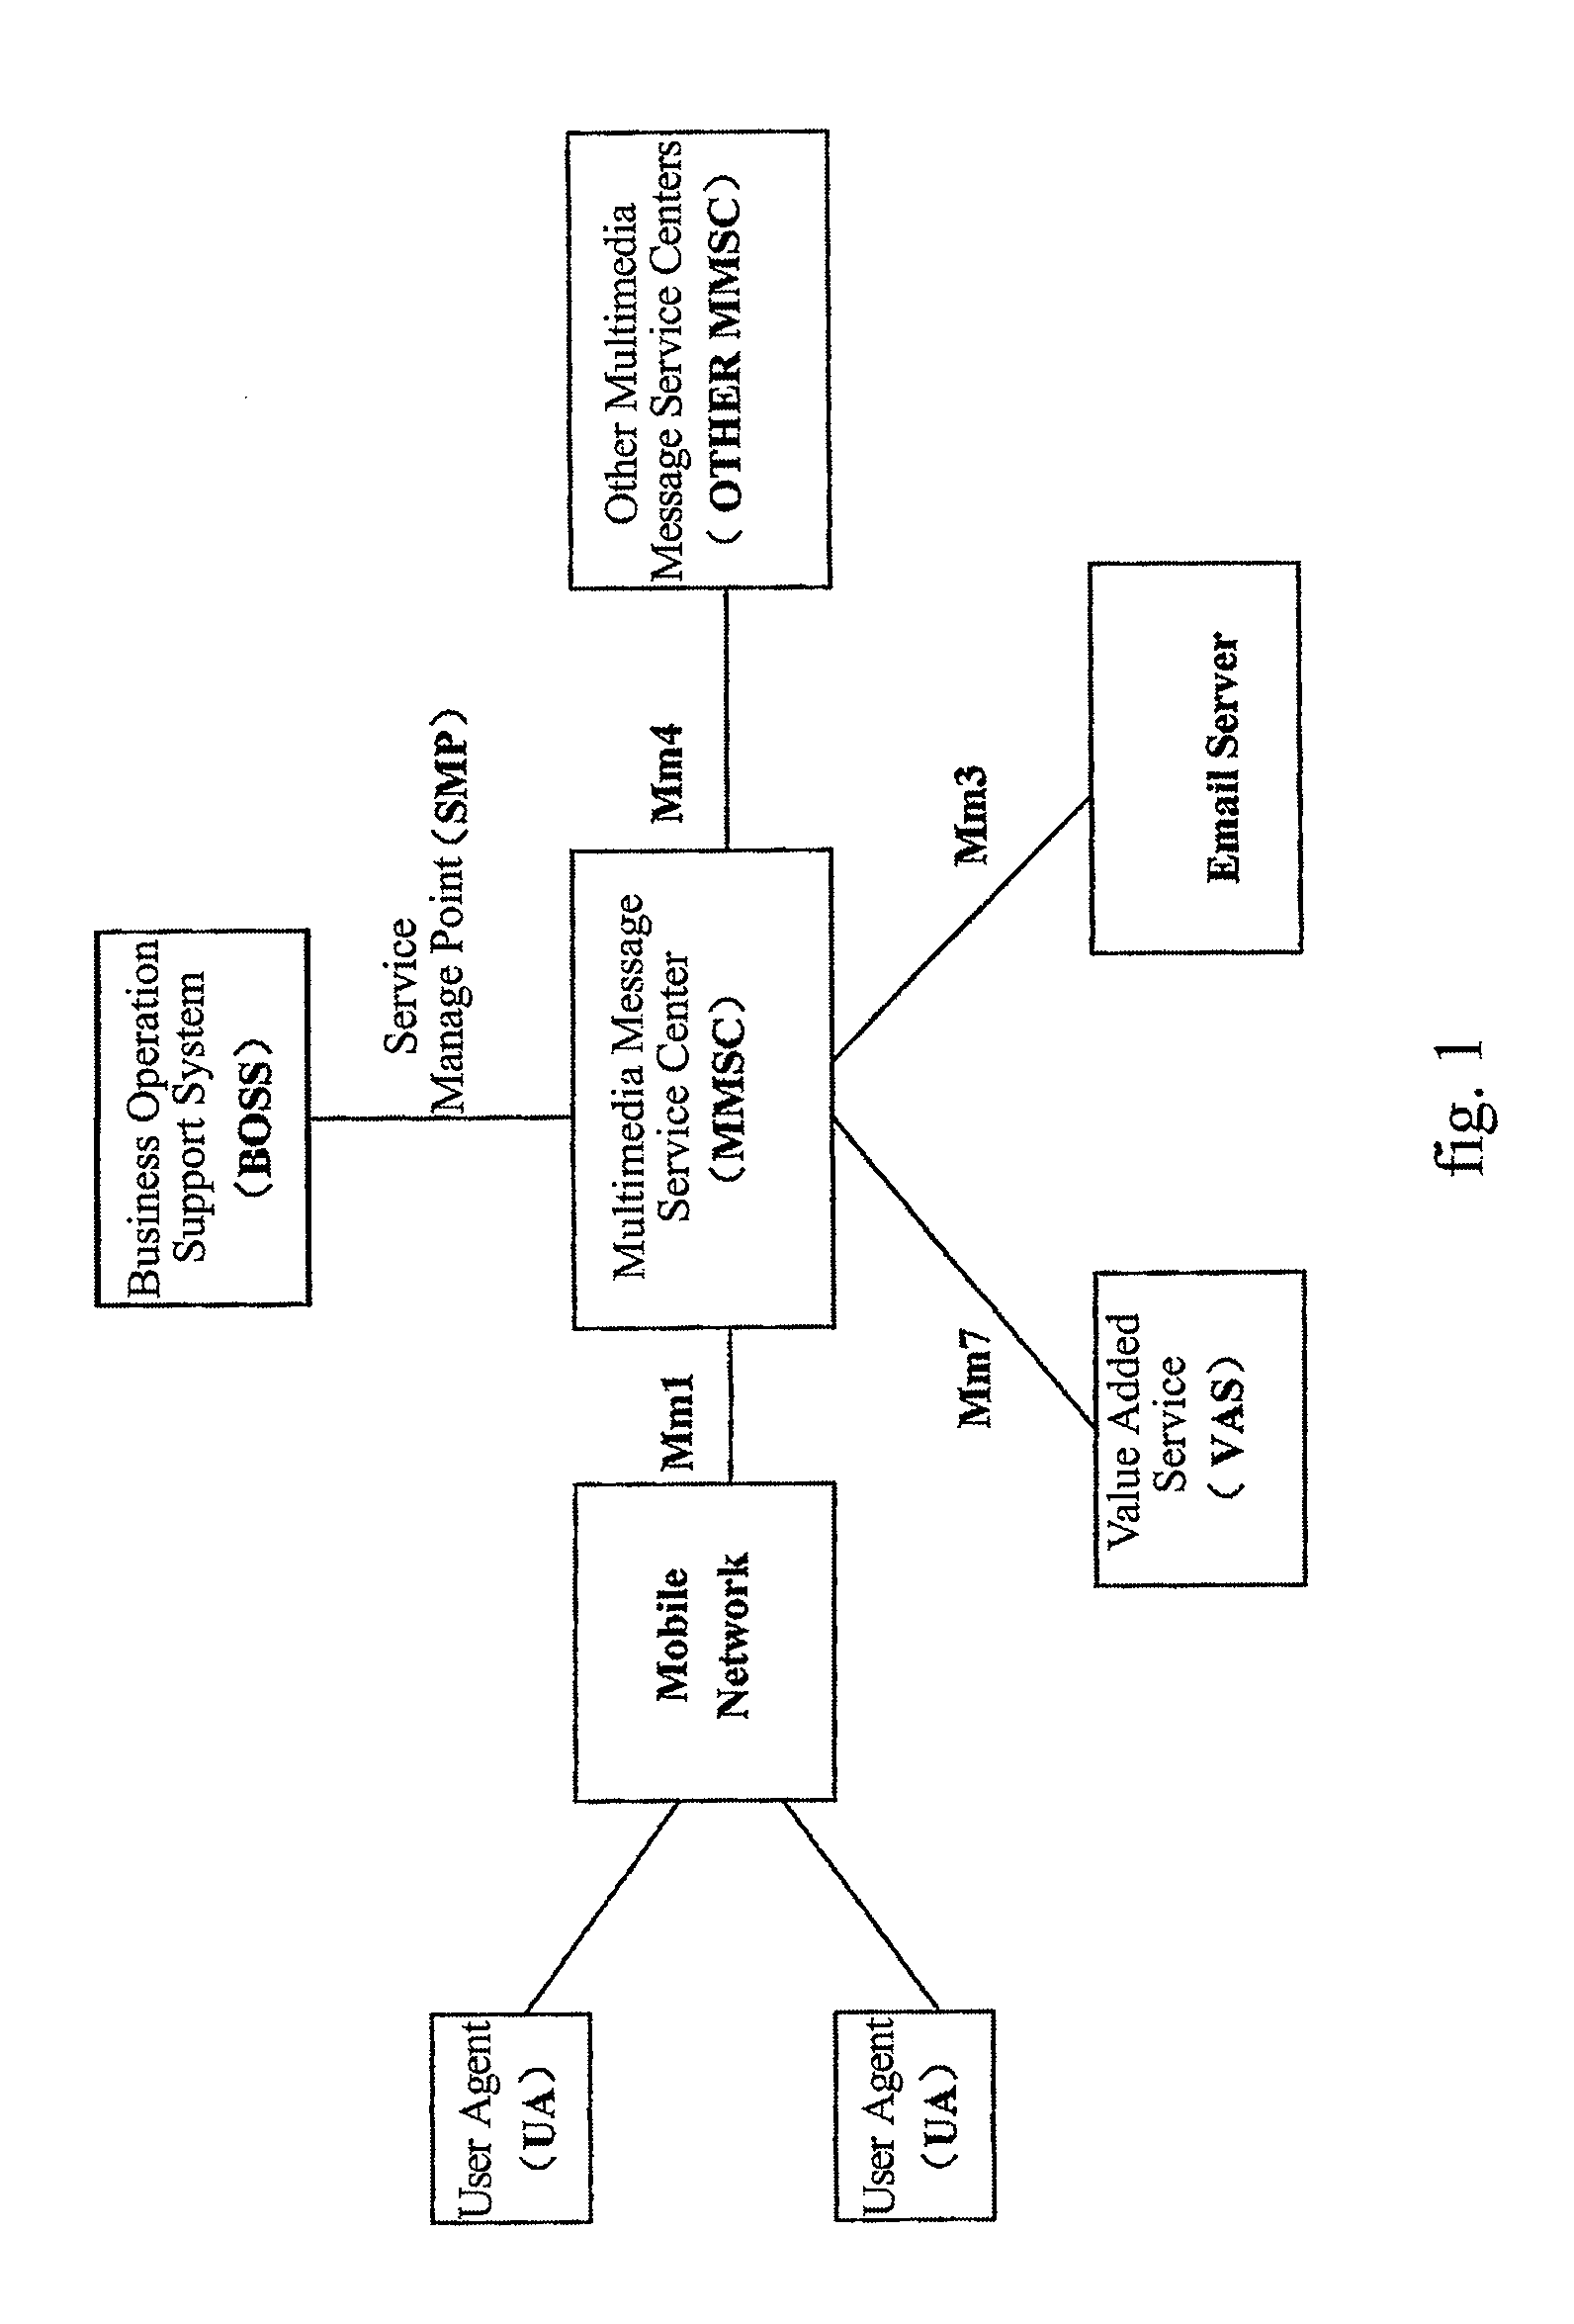 Method for realizing multimedia message signature service